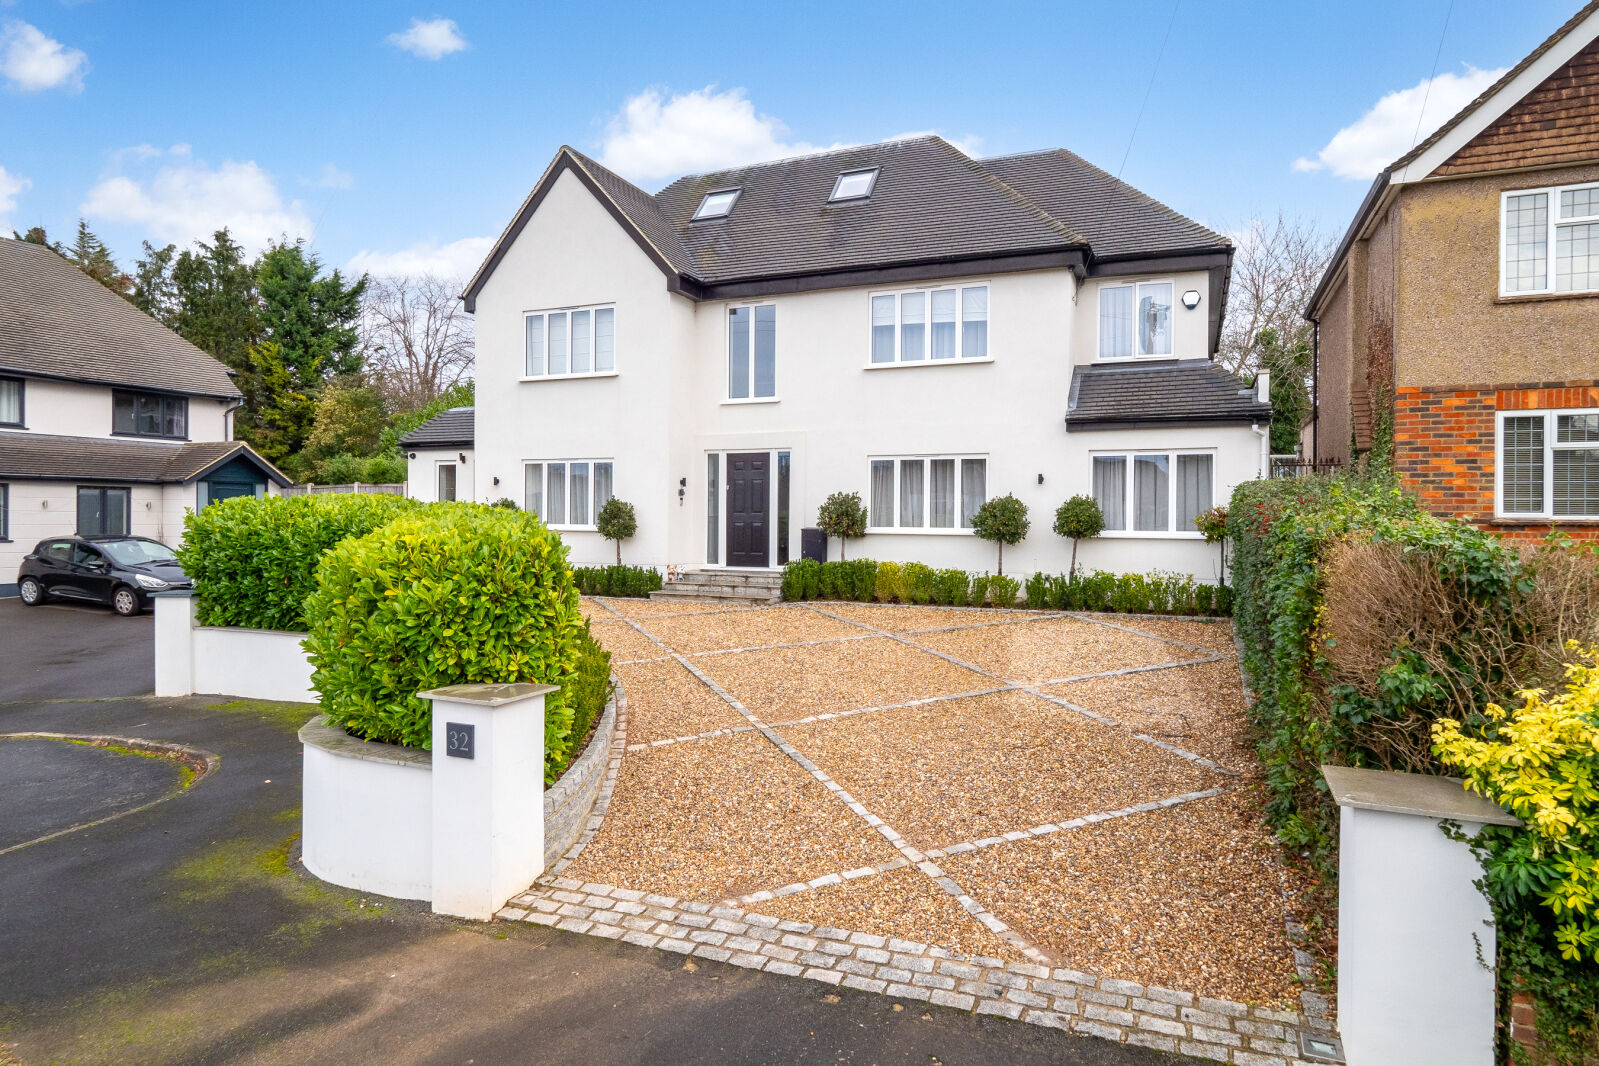 5 bedroom detached house for sale The Dene, Cheam, SM2, main image